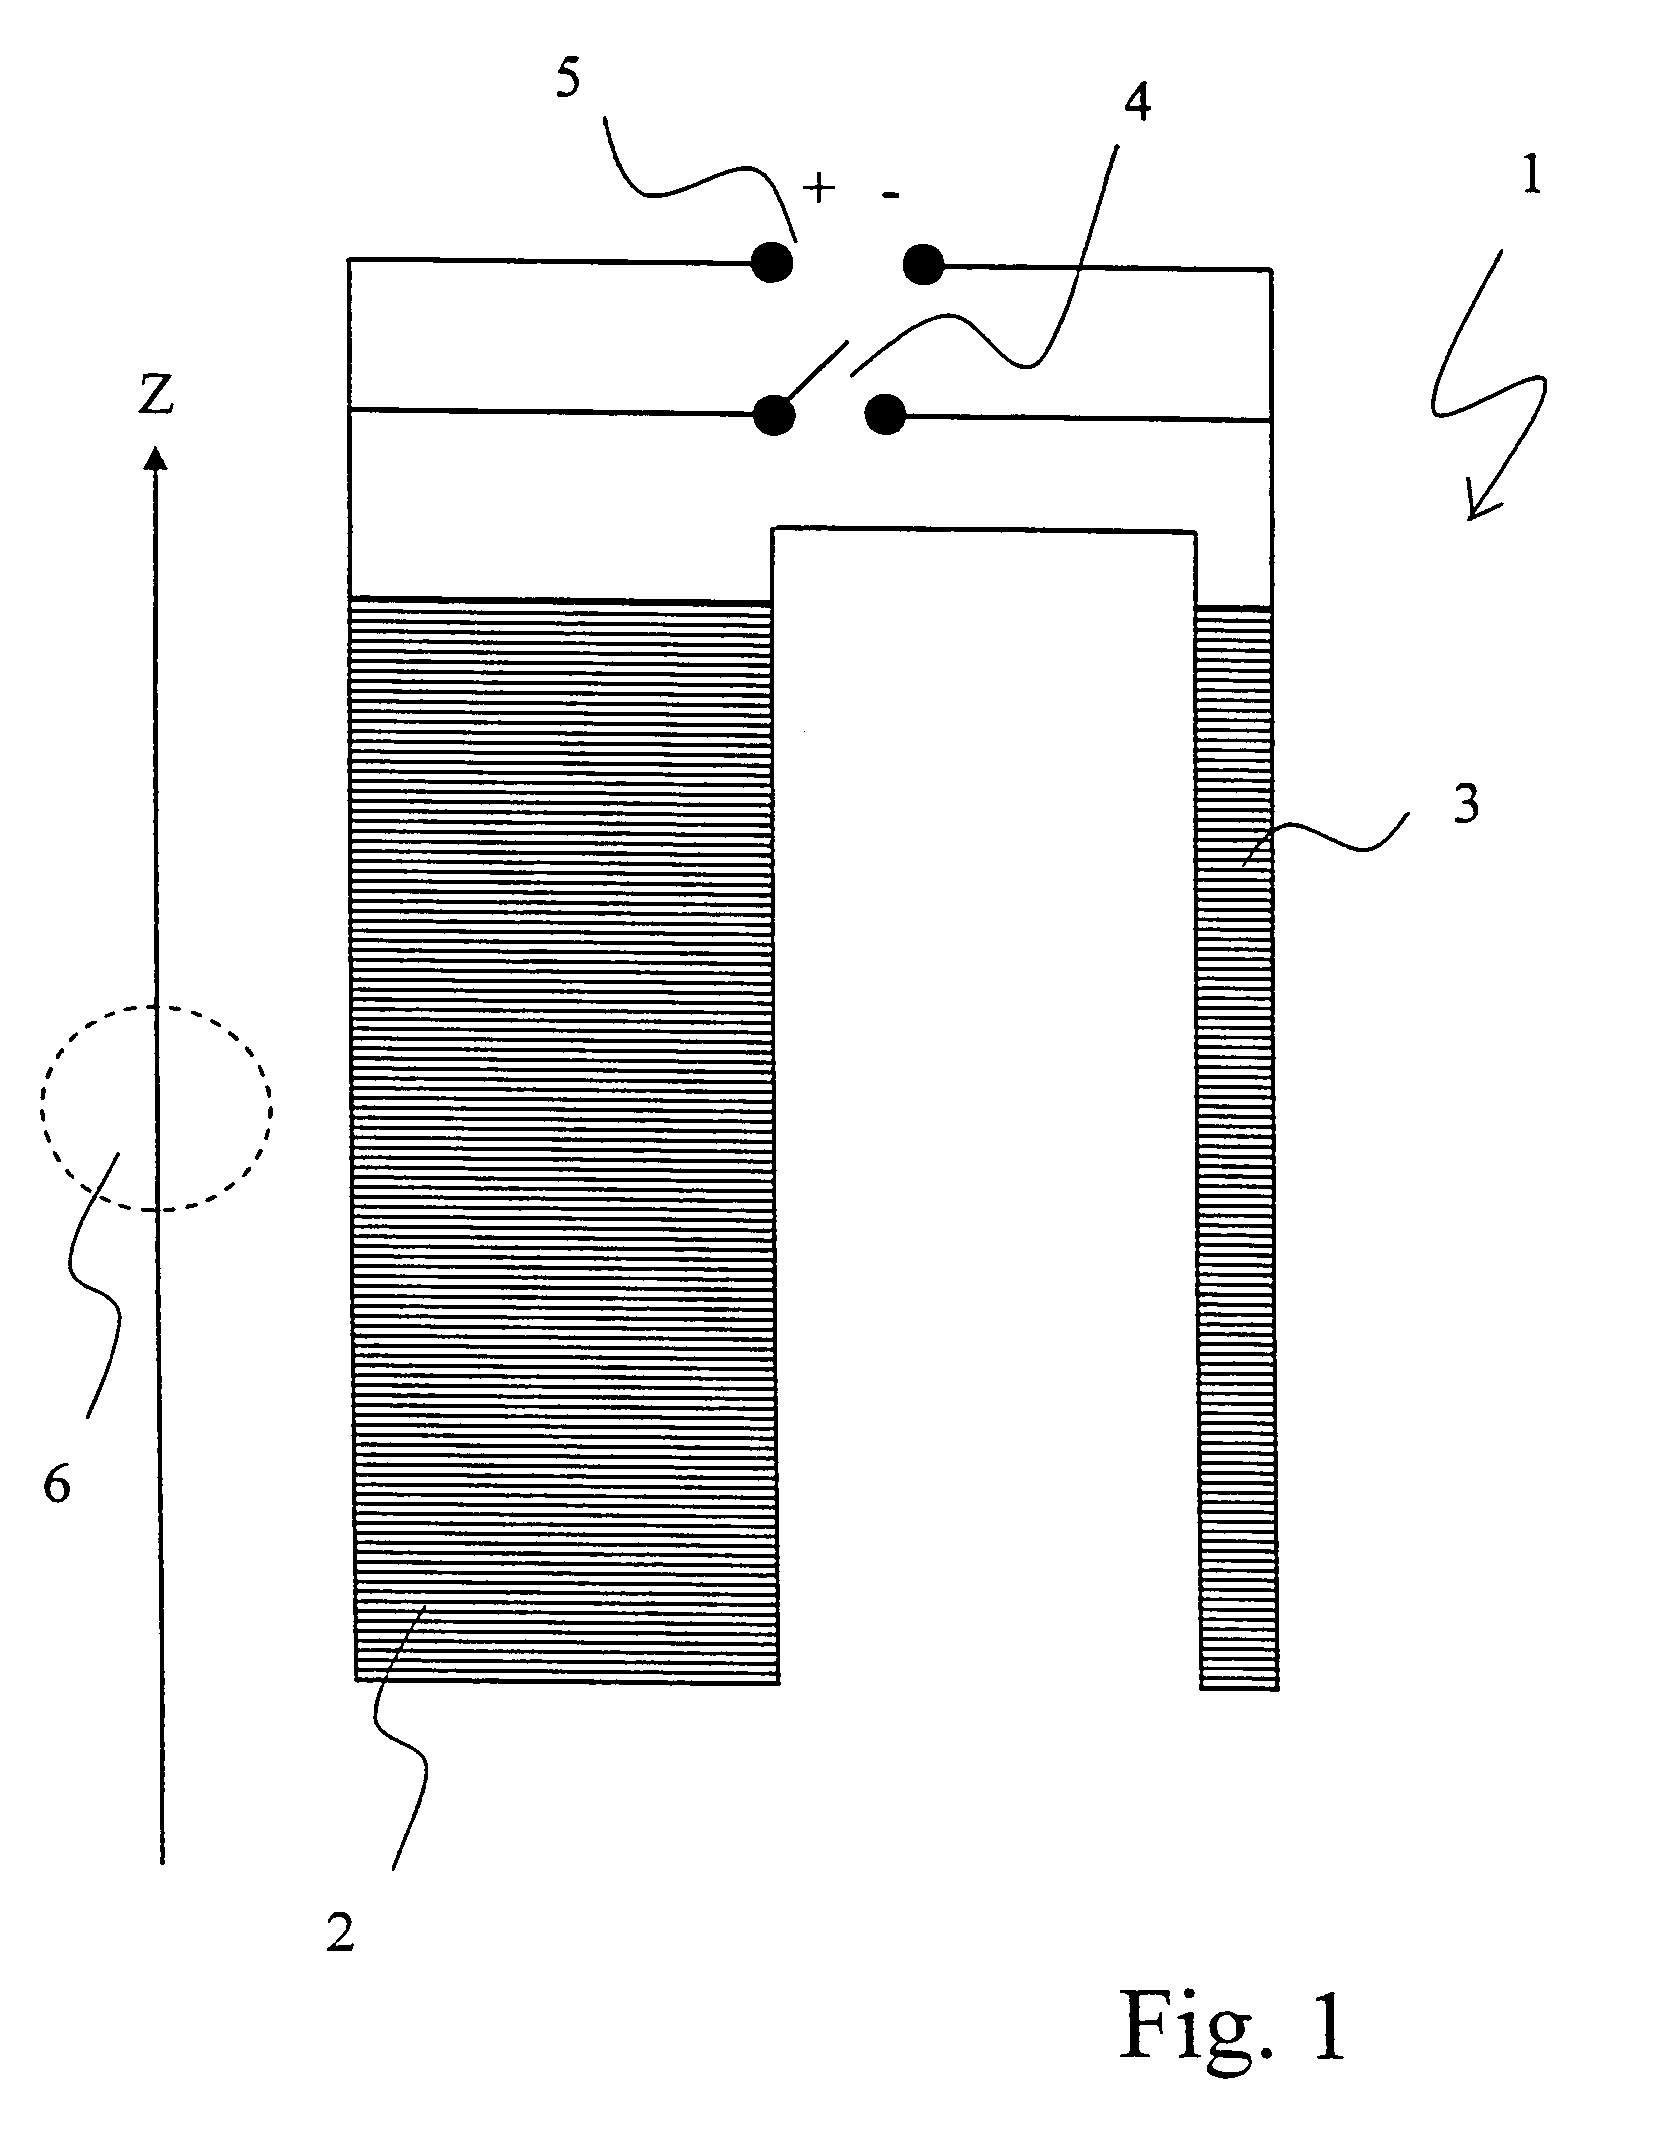 Method for testing a superconductor under increased current load in a series-produced and actively shielded superconducting NMR magnet